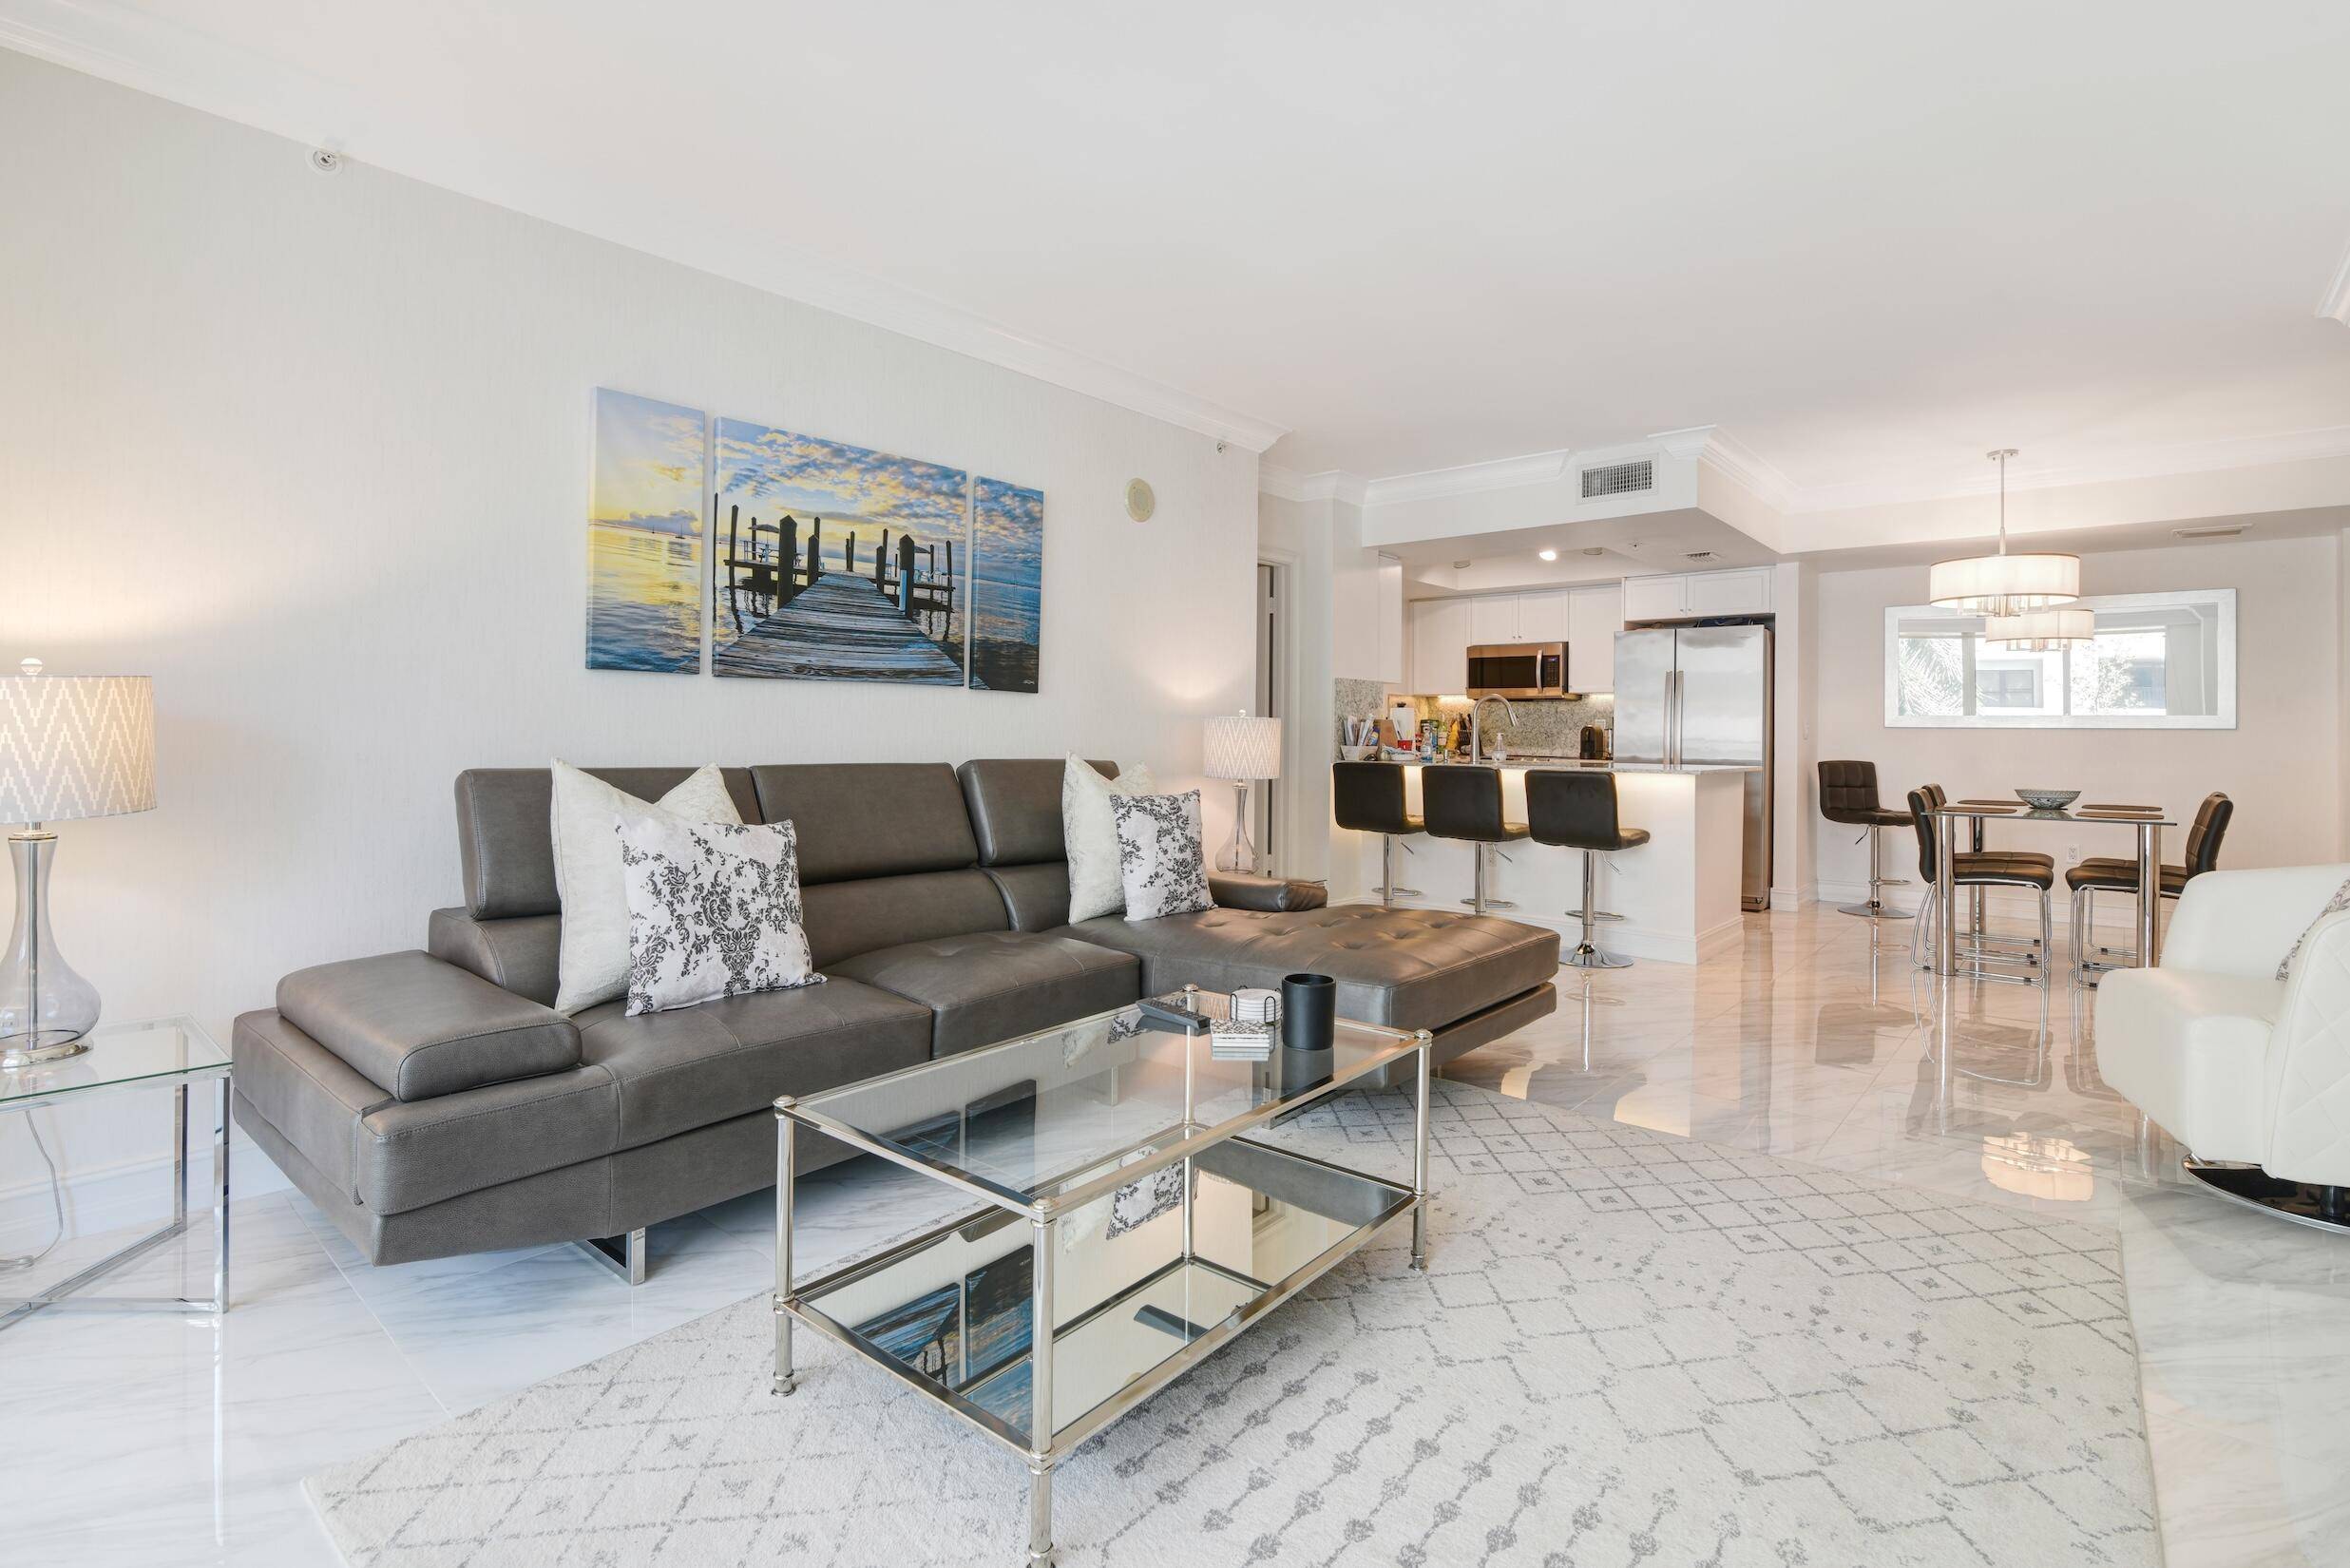 Absolutely perfect 2BR 2BA fully furnished condominium in the prestigious Palmetto Place, this residence offers a sophisticated urban lifestyle with split bedrooms, open white kitchen and porcelain floors throughout.